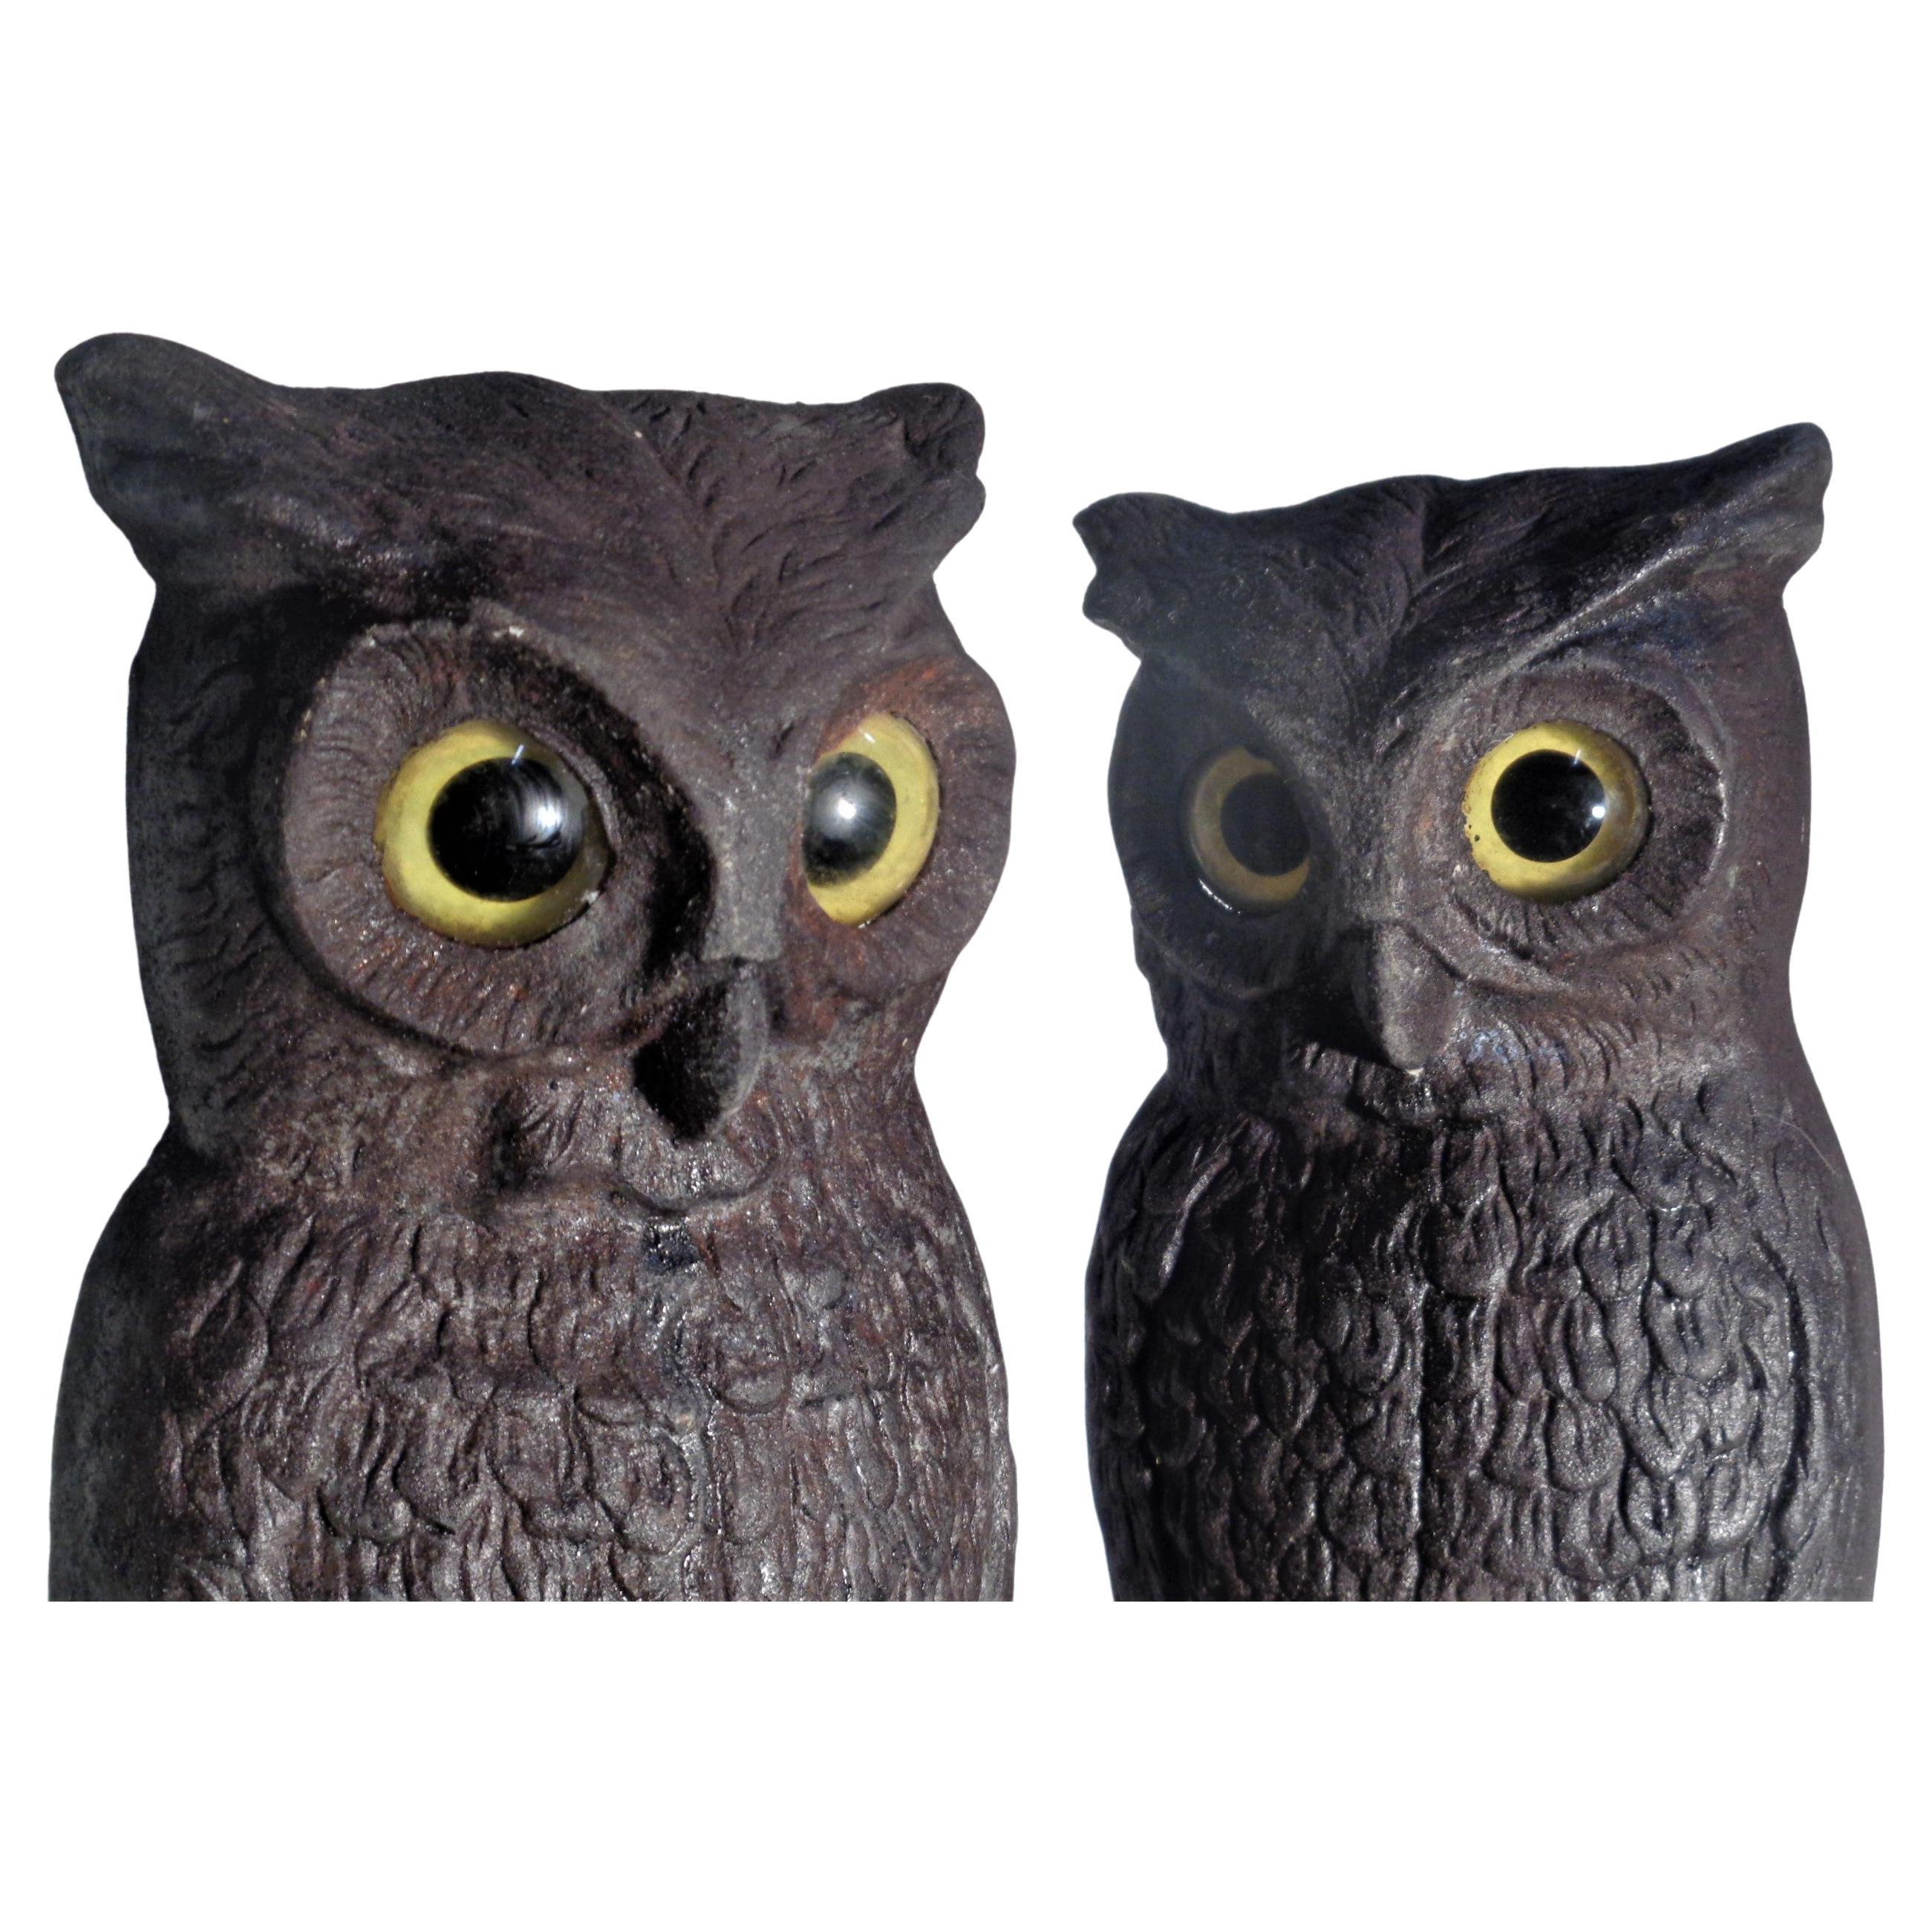 Antique American cast iron owl andirons. Owls w/ original glass eyes. Signed on inside back of owls / signed on the fire dogs. Circa 1900. Measure 15